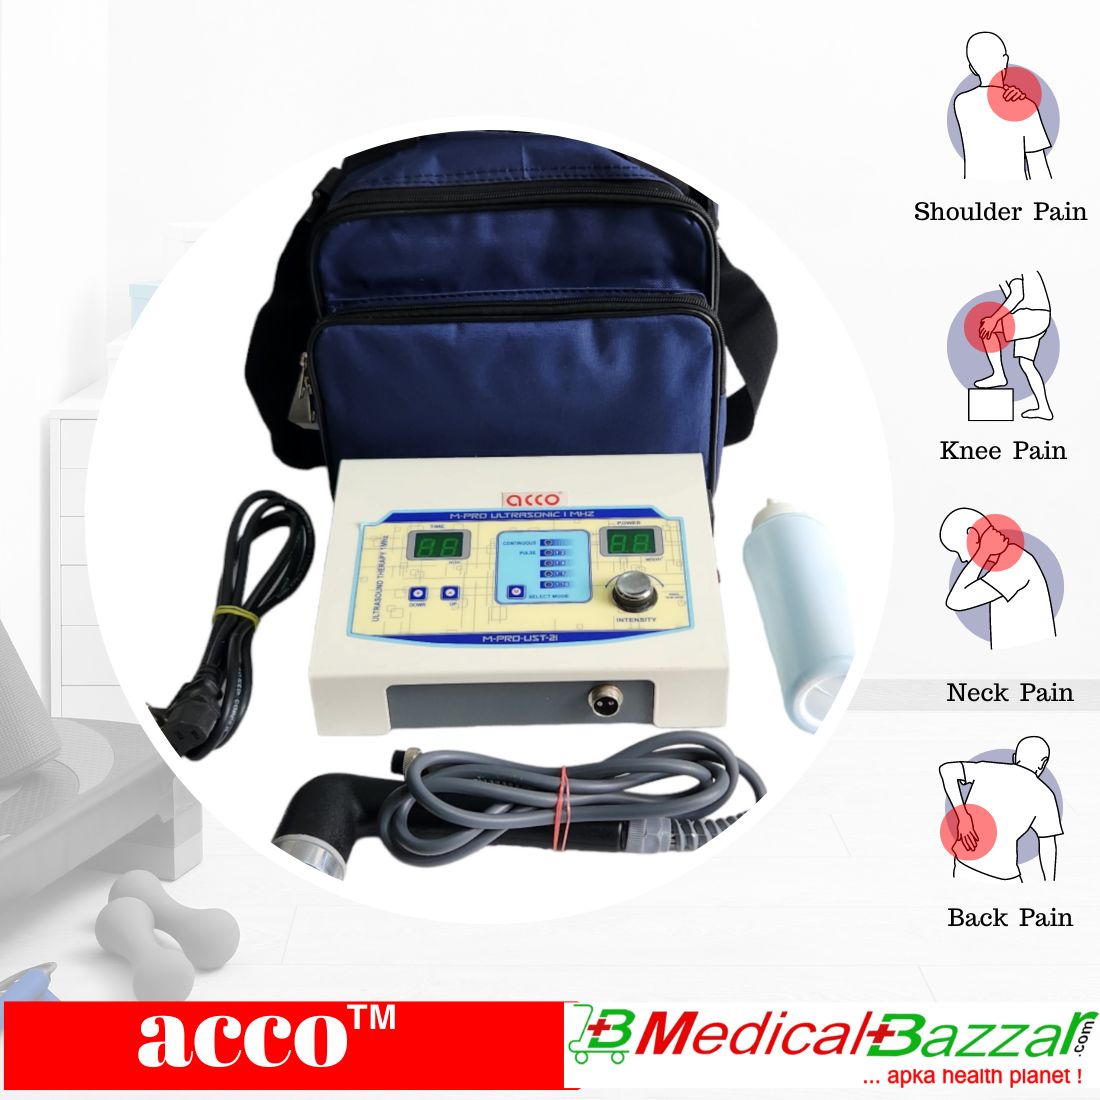 acco Ultrasound Therapy Machine 1 Mhz (with Pause Feature)